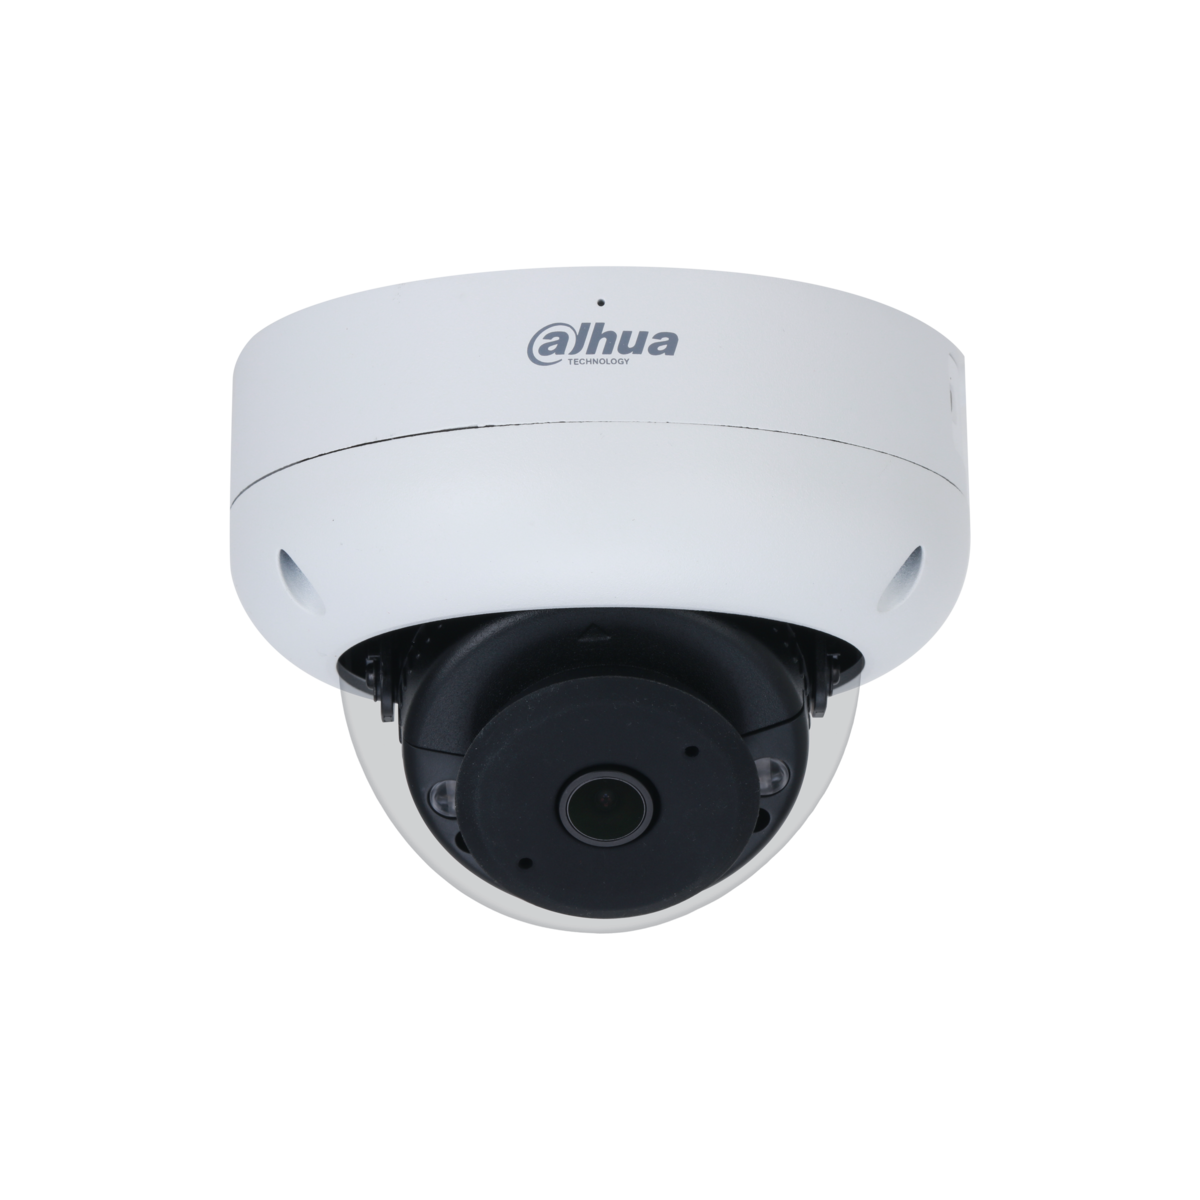 WIZSENSE SERIES IP CAMERA WHITE AI 180° 4MP H.264/4+/5/5+ DOME 120 WDR METAL 2.1MMFIXED LENS STARLIGHT IR 15M POE IP67 BUILT IN MIC AUDIO IN AUDIO OUT 1 x ALARM IN 1 x ALARM OUT SUPPORT UP TO 256GB SD IK10 12VDC